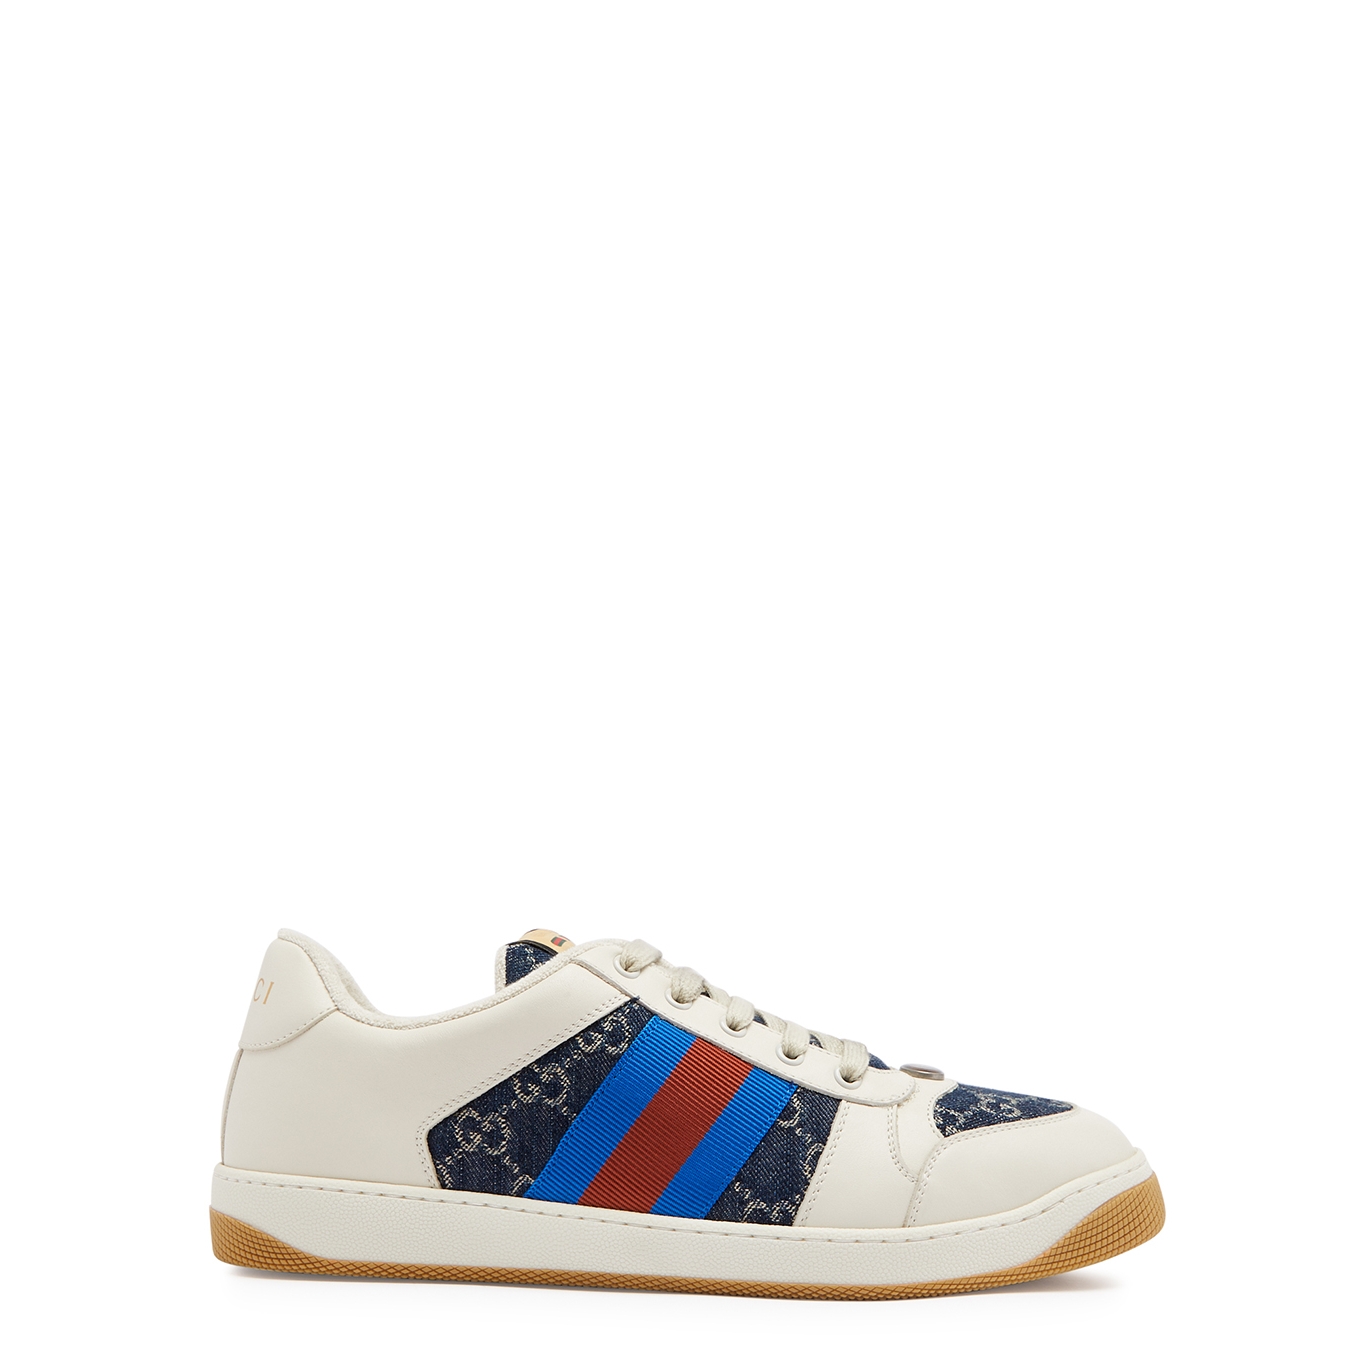 GUCCI SCREENER PANELLED LEATHER SNEAKERS